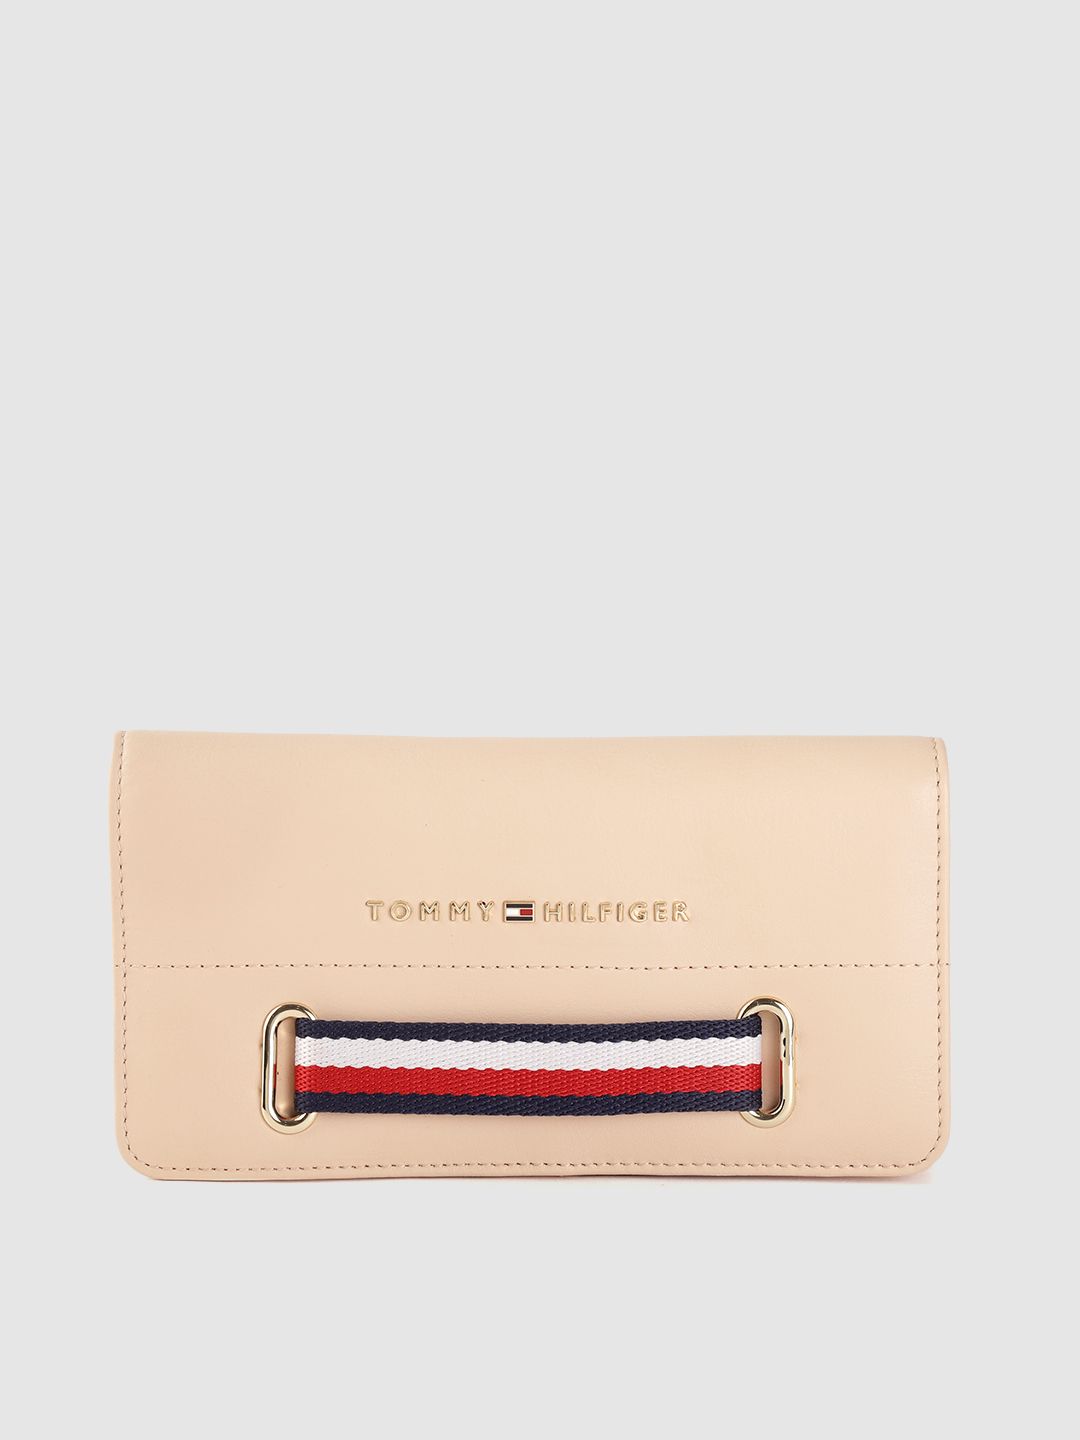 Tommy Hilfiger Women Peach-Coloured Leather Two Fold Wallet Price in India